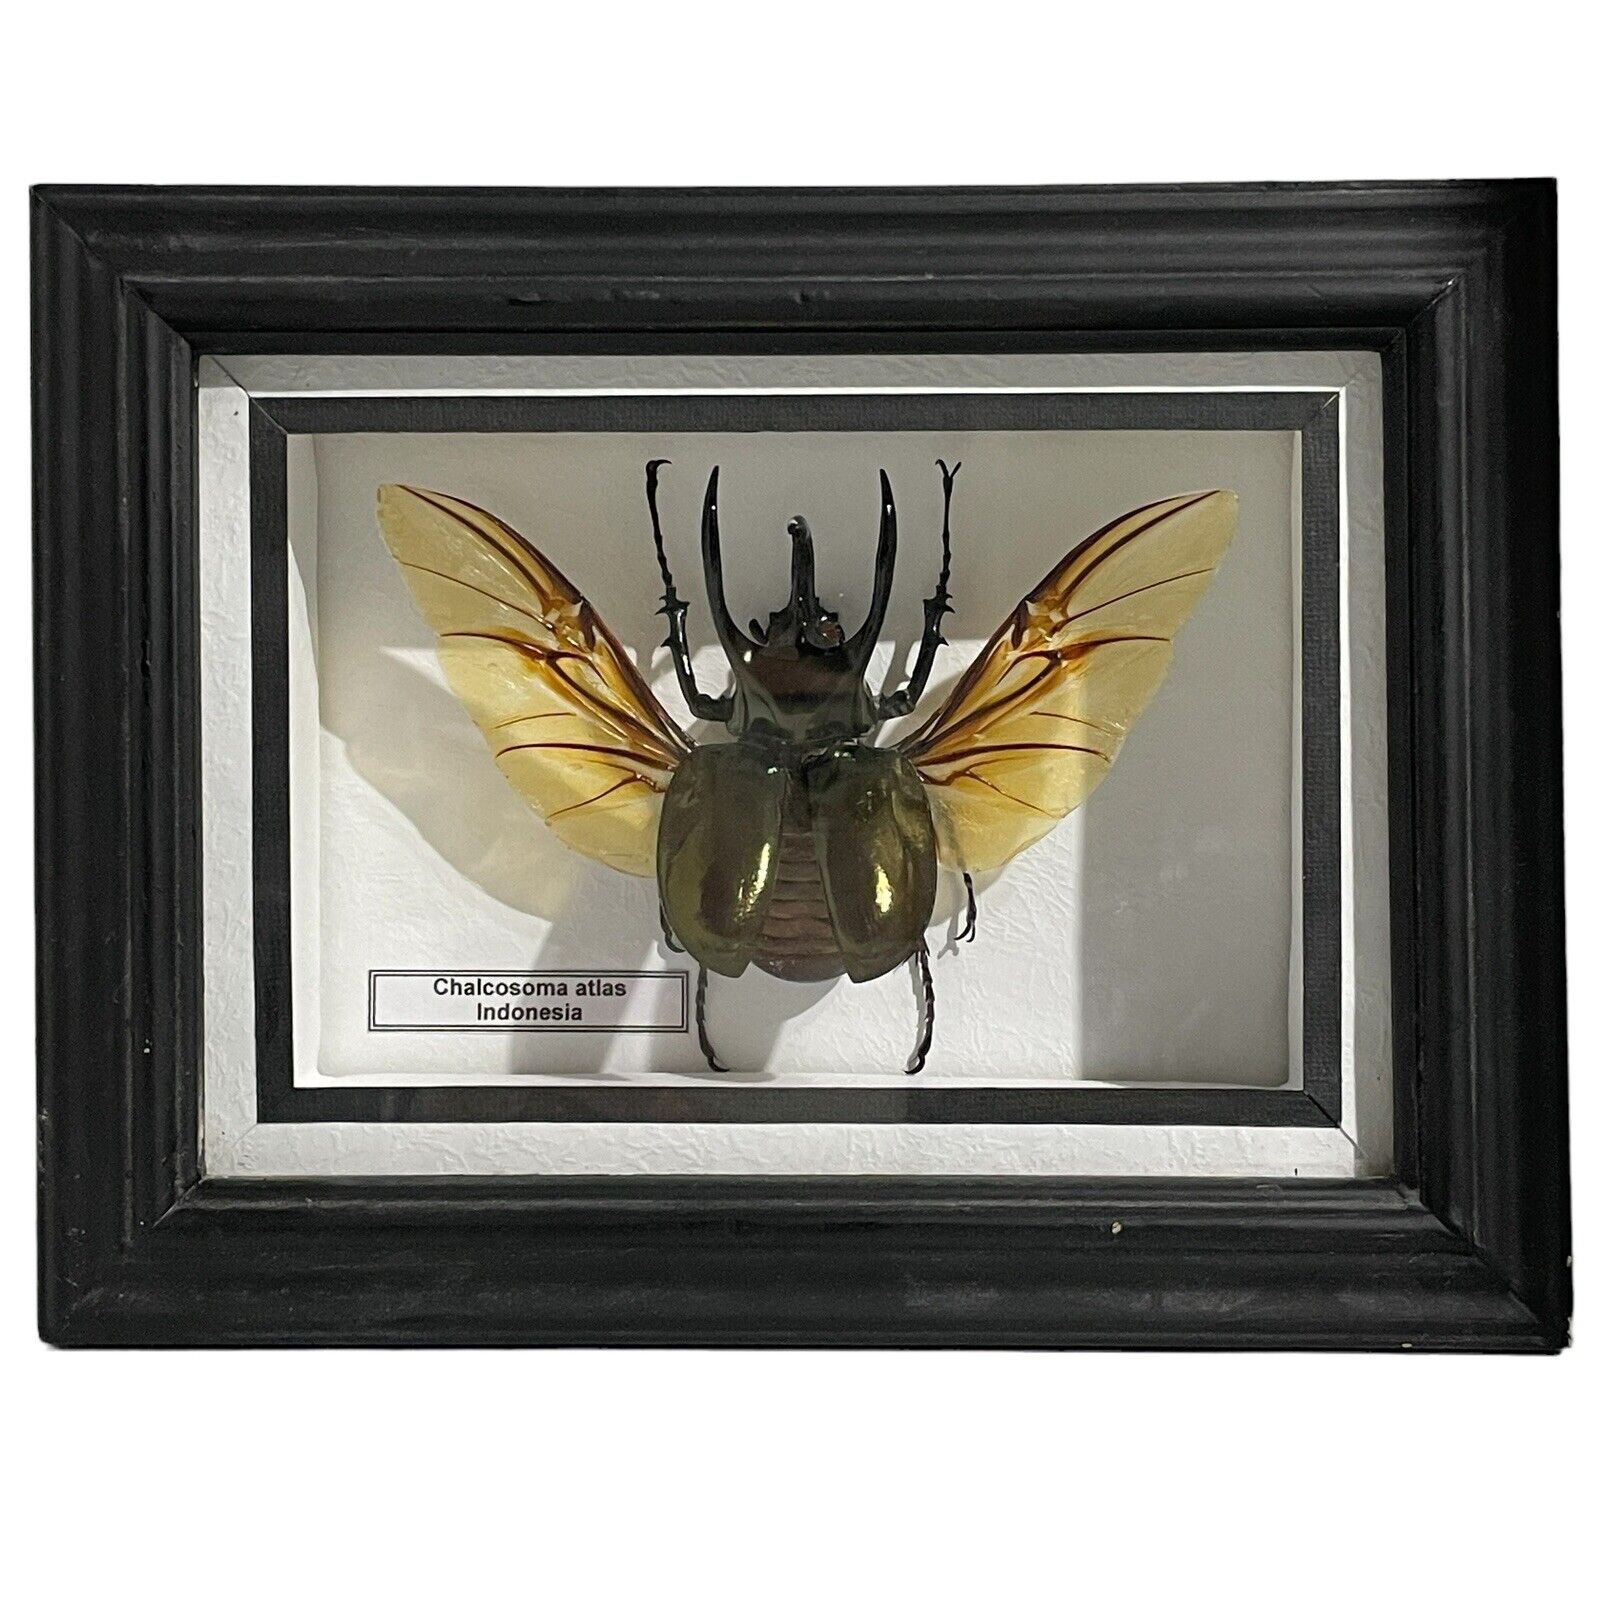 Chalcosoma Atlas Beetle Indonesia 3D Showcase Display Wings Spread Taxidermy